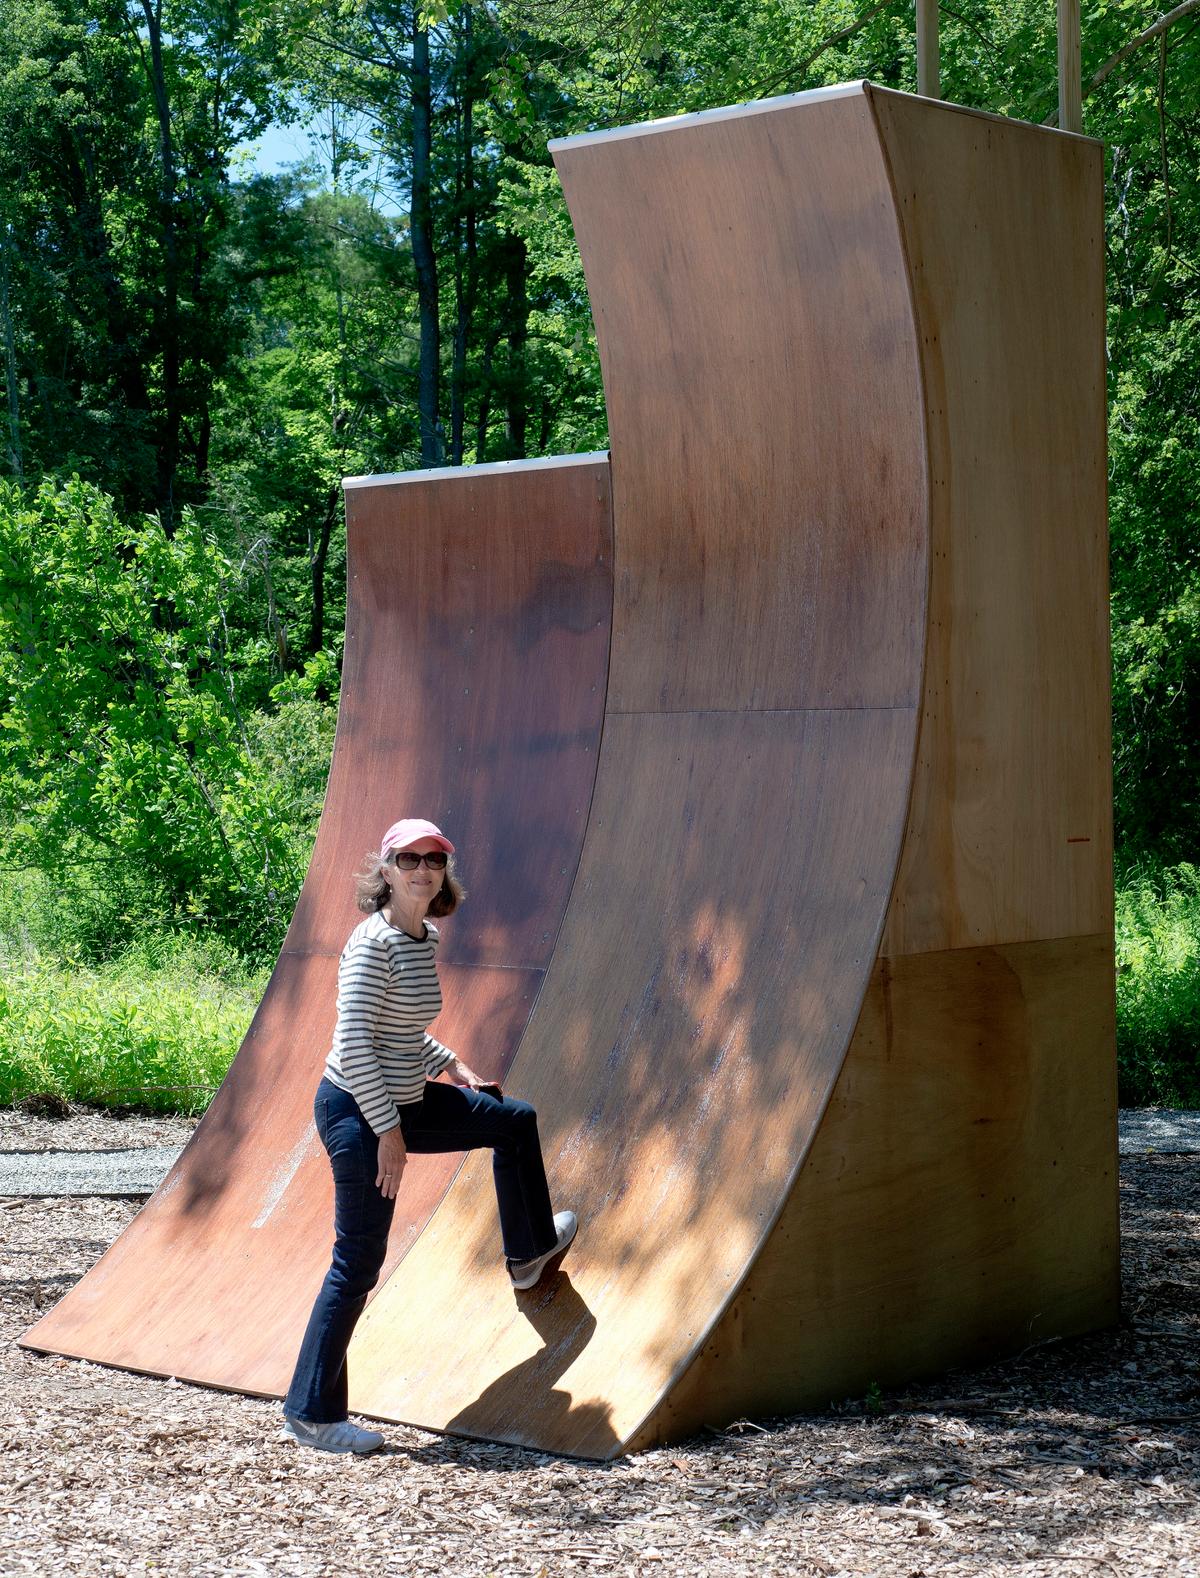 Jeanie Stiles in front of a completed warped wall, a must-have in any ninja adventure course. (Simon Jutras)